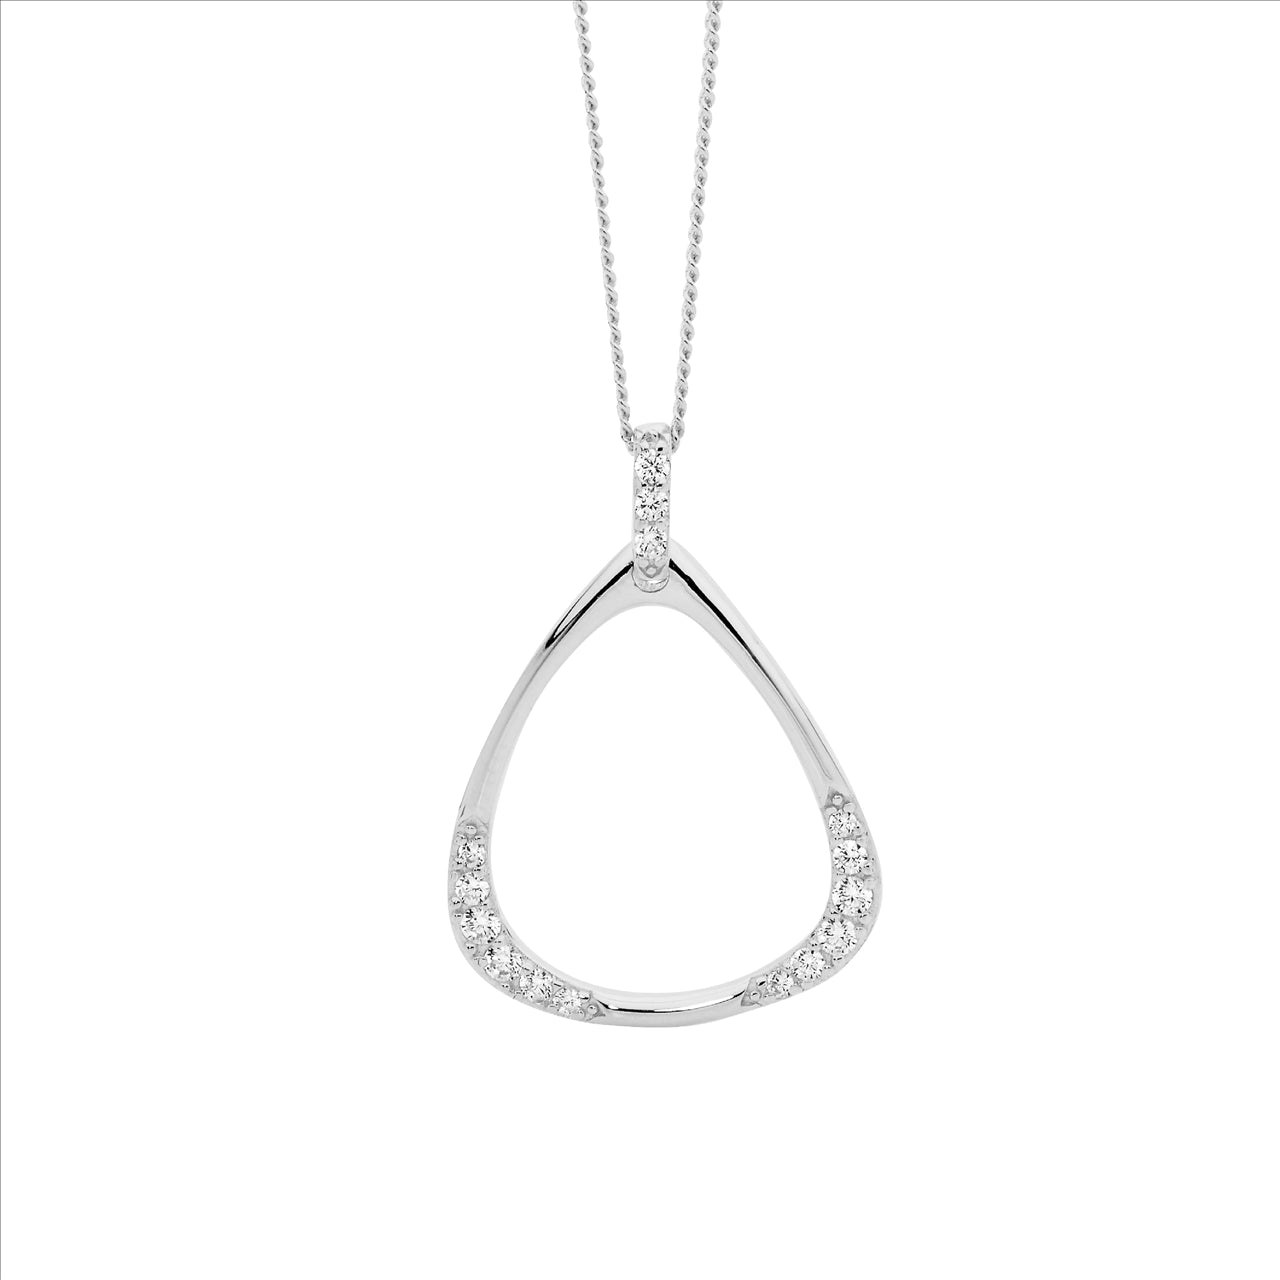 Sterling Silver Triangle with Cubic Zirconia's Drop Necklace